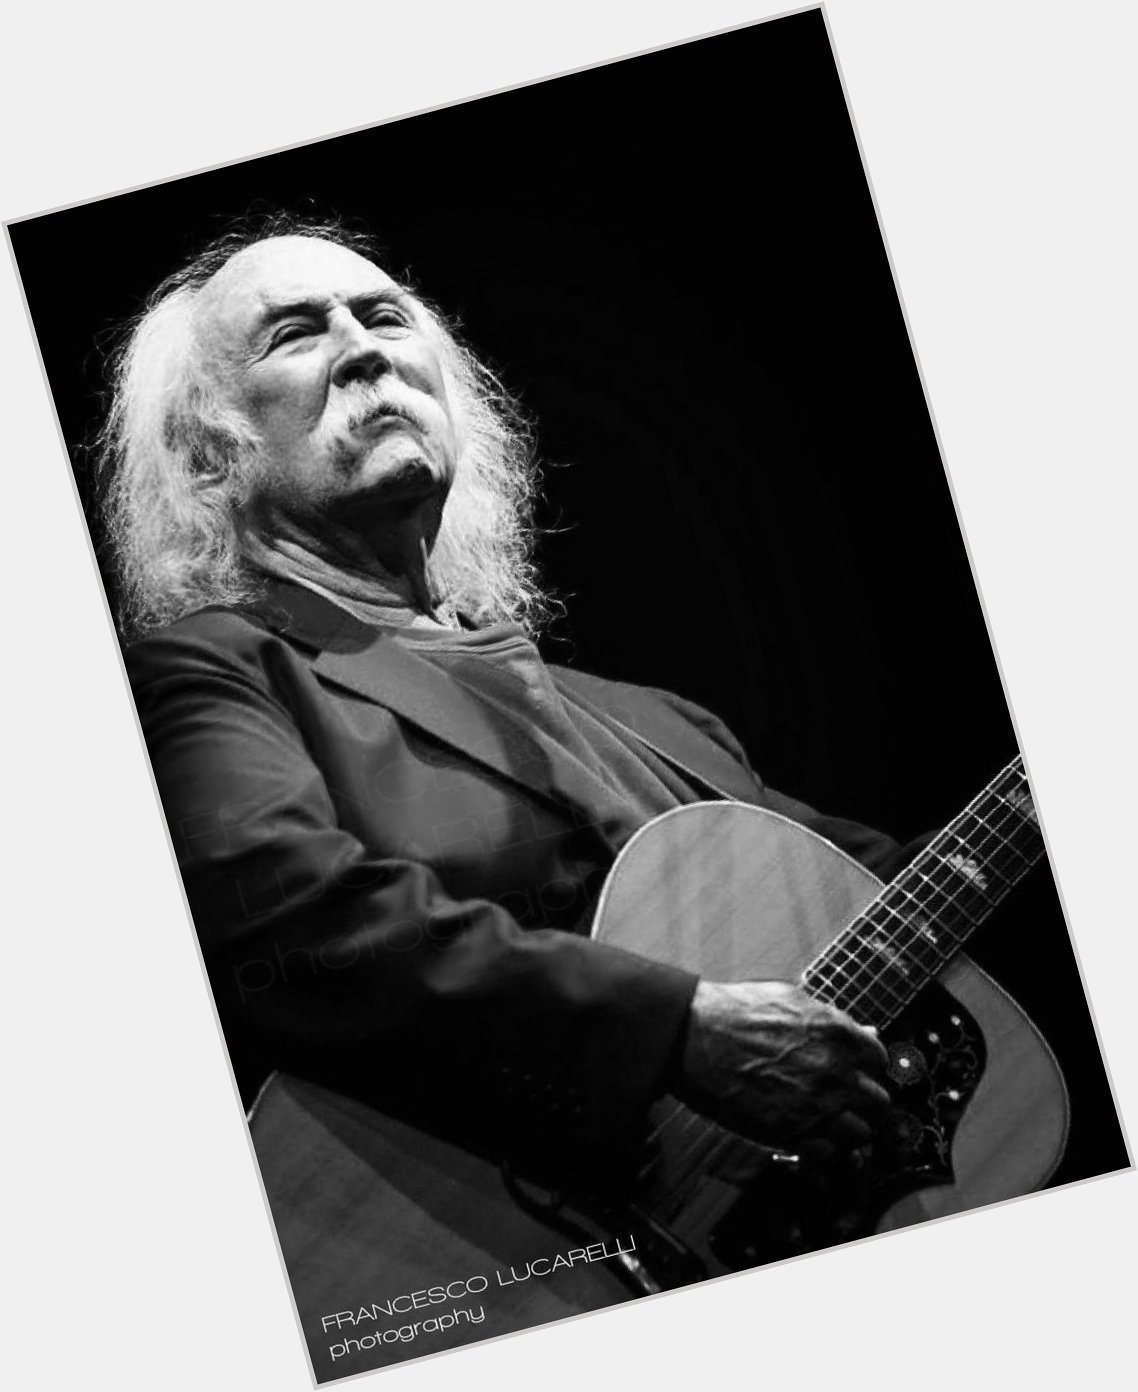 Happy Birthday to the one and only David Crosby! 